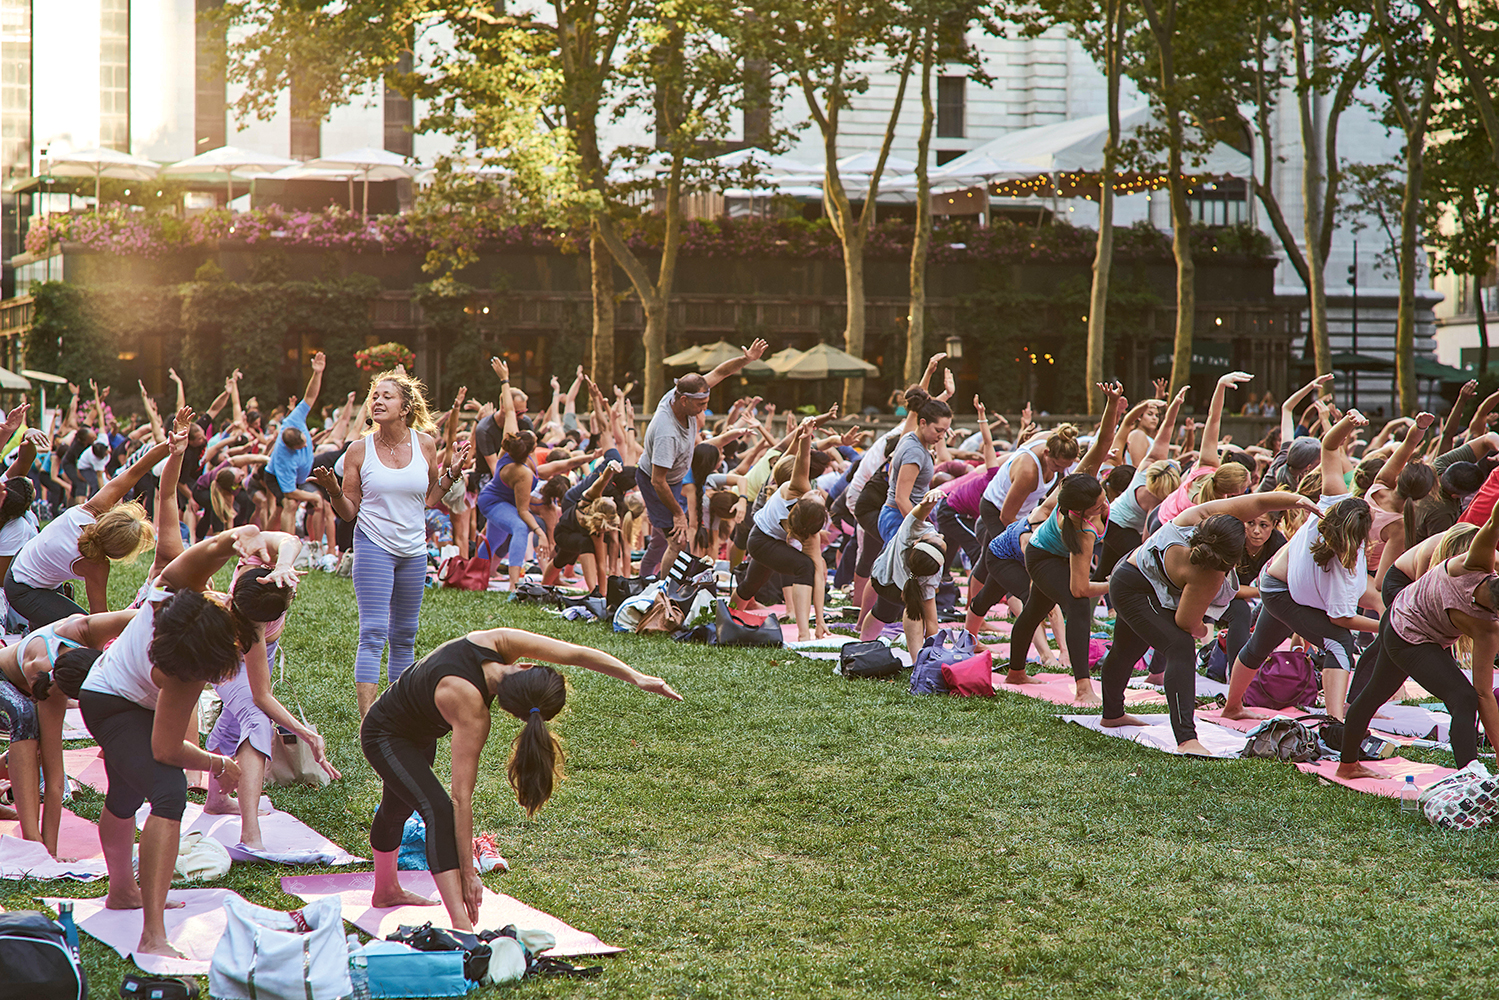 Pretend you’re a local: Take advantage of free yoga in Bryant Park and no-admission-fee Fridays at the Museum of Modern Art. Photograph of Bryant Park by Francisco Dominguez/Alamy.